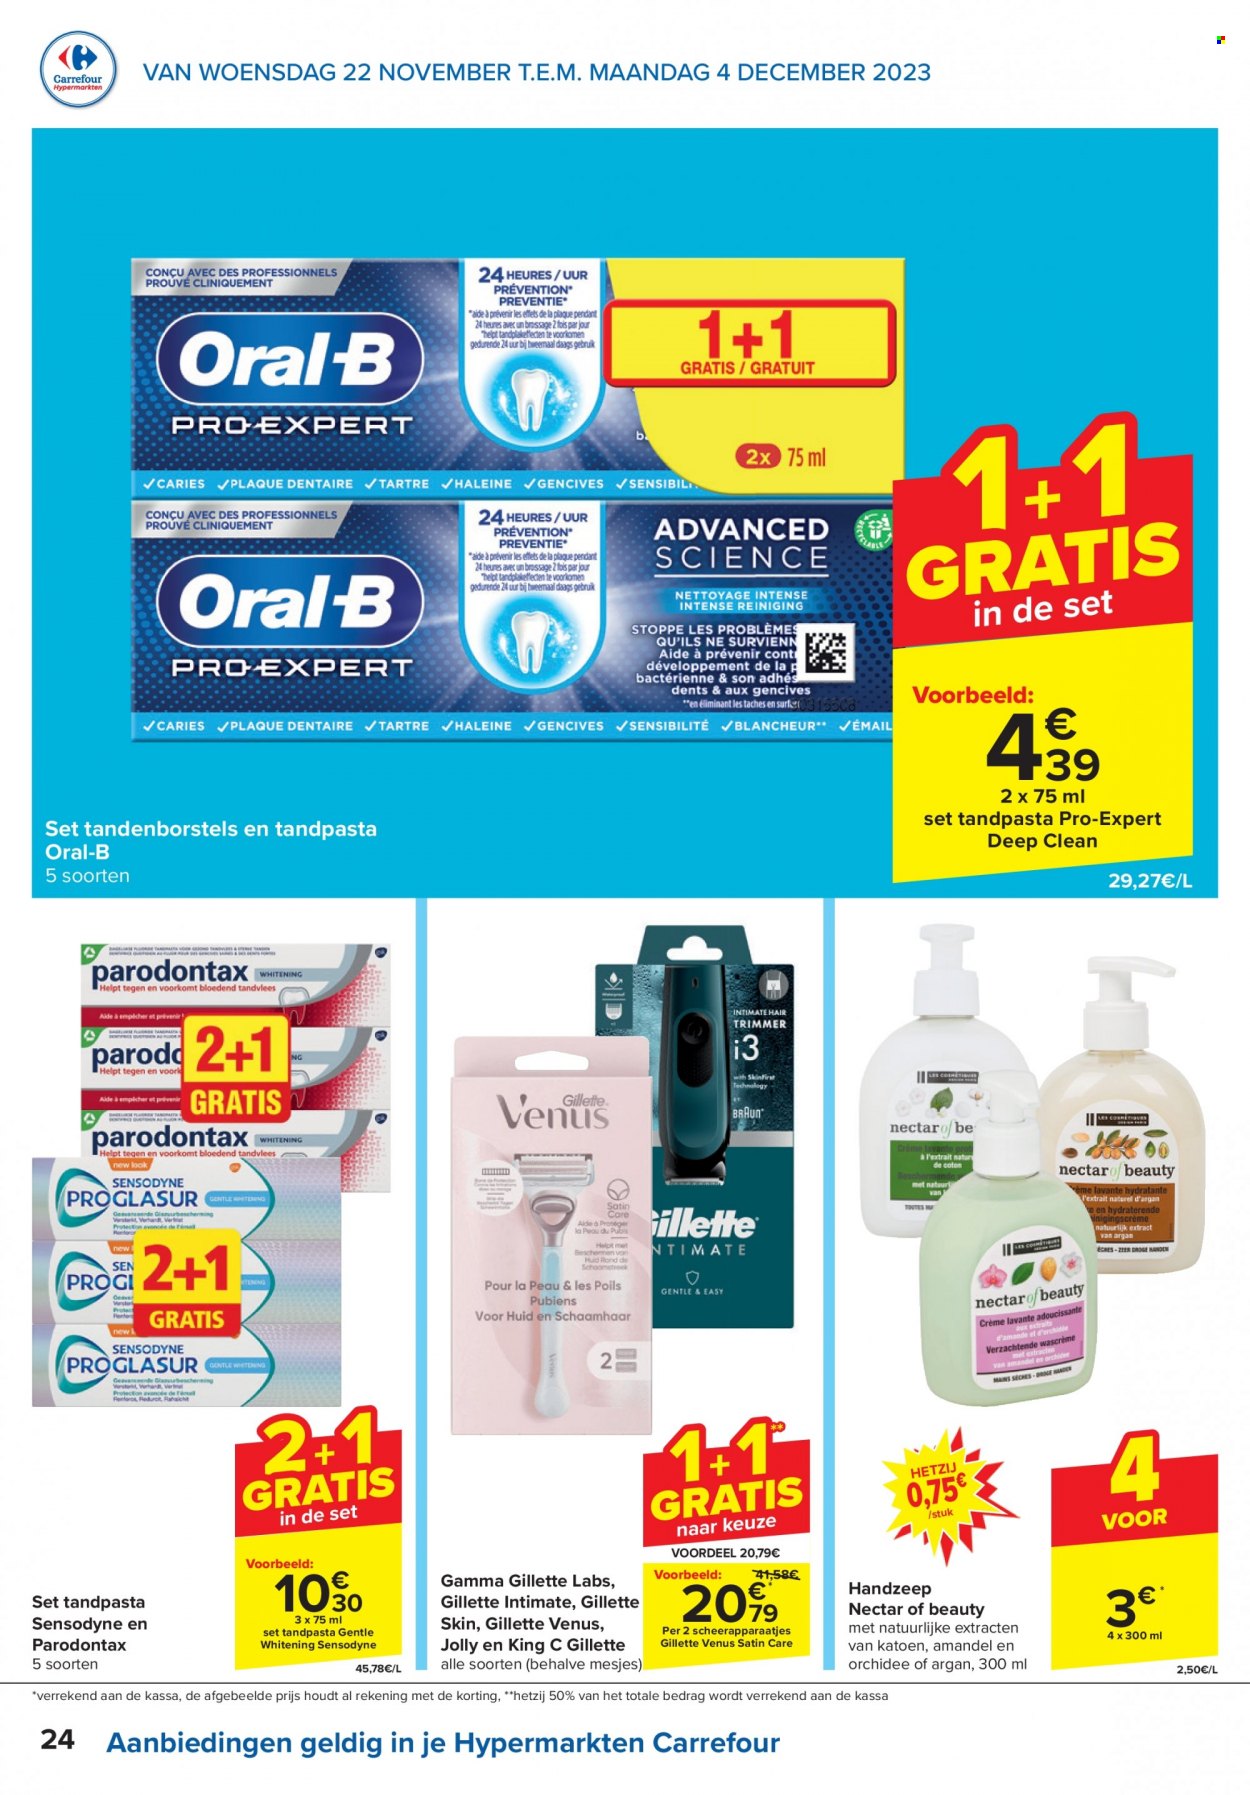 Catalogue Carrefour hypermarkt - 22.11.2023 - 4.12.2023. Page 24.